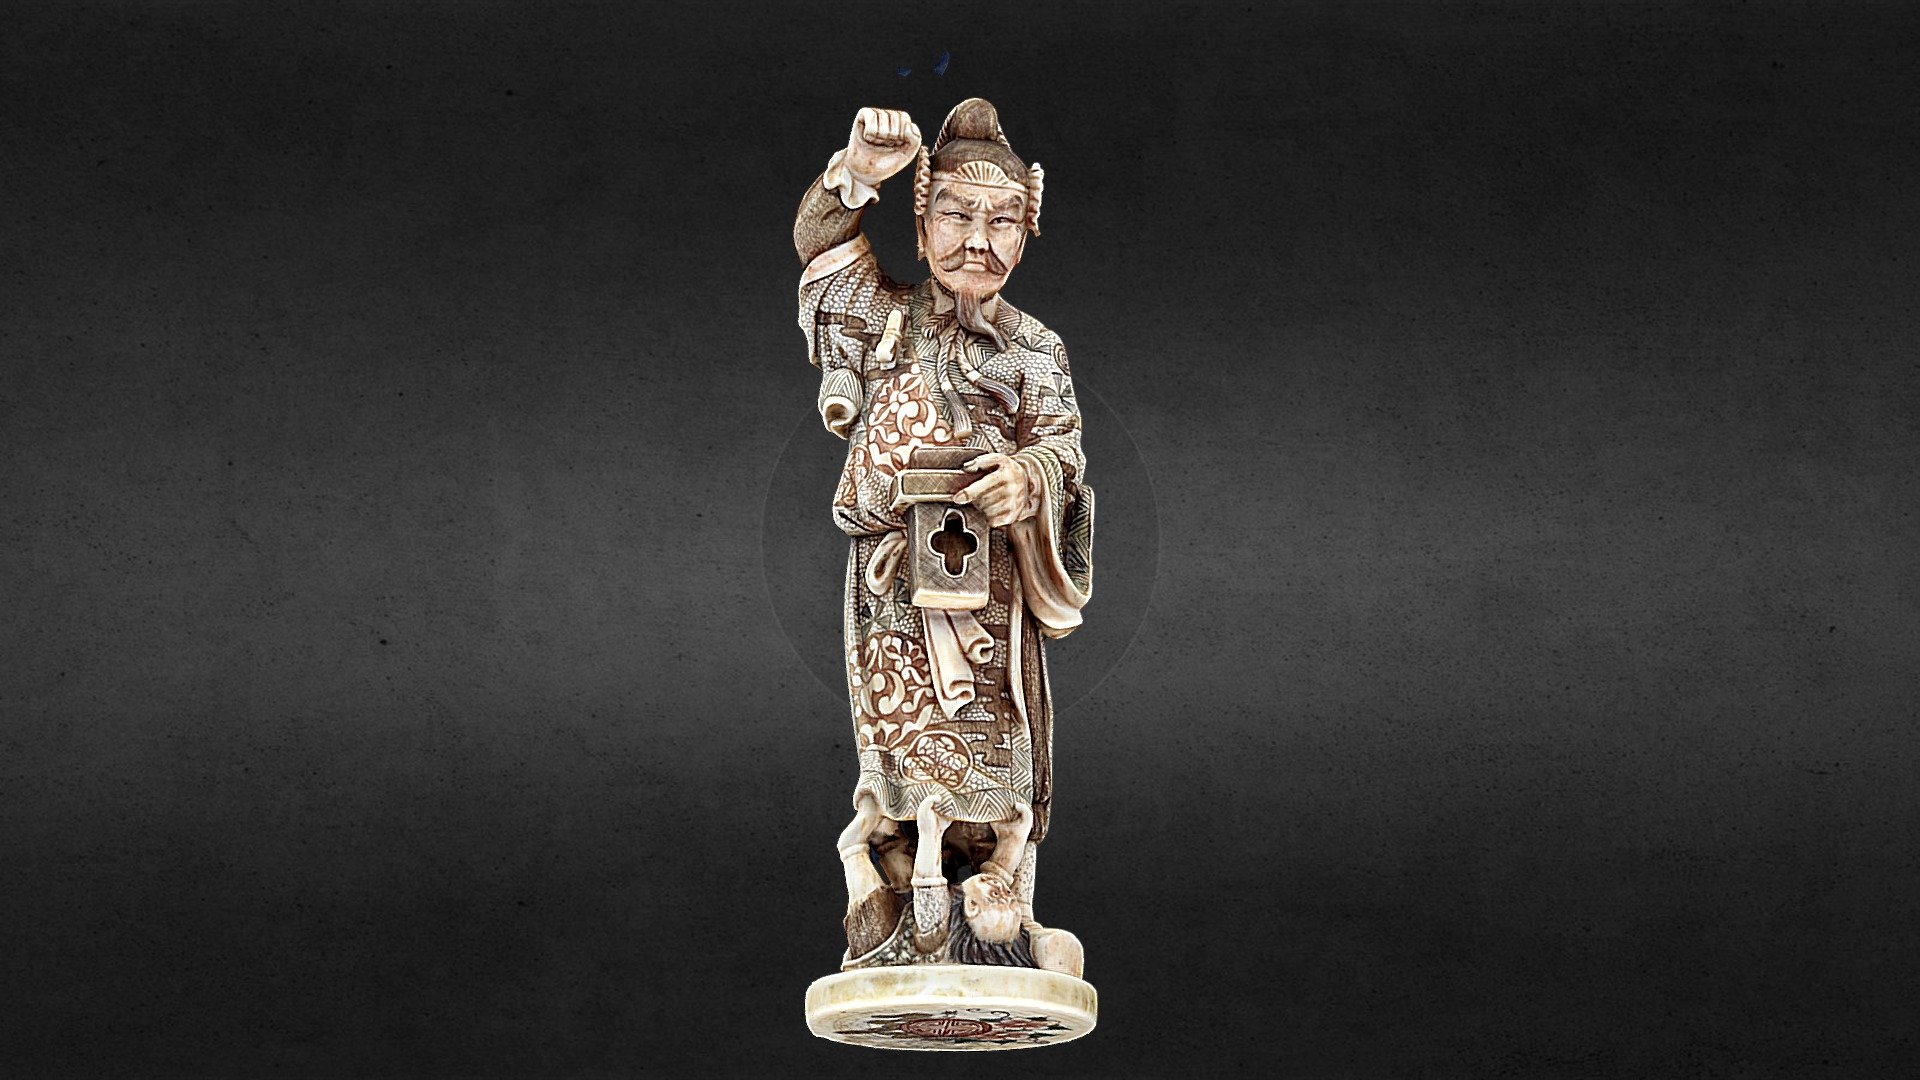 Antique Chinese carving of a preist and demon.

Created in RealityCapture by Capturing Reality from 225 images 3d model